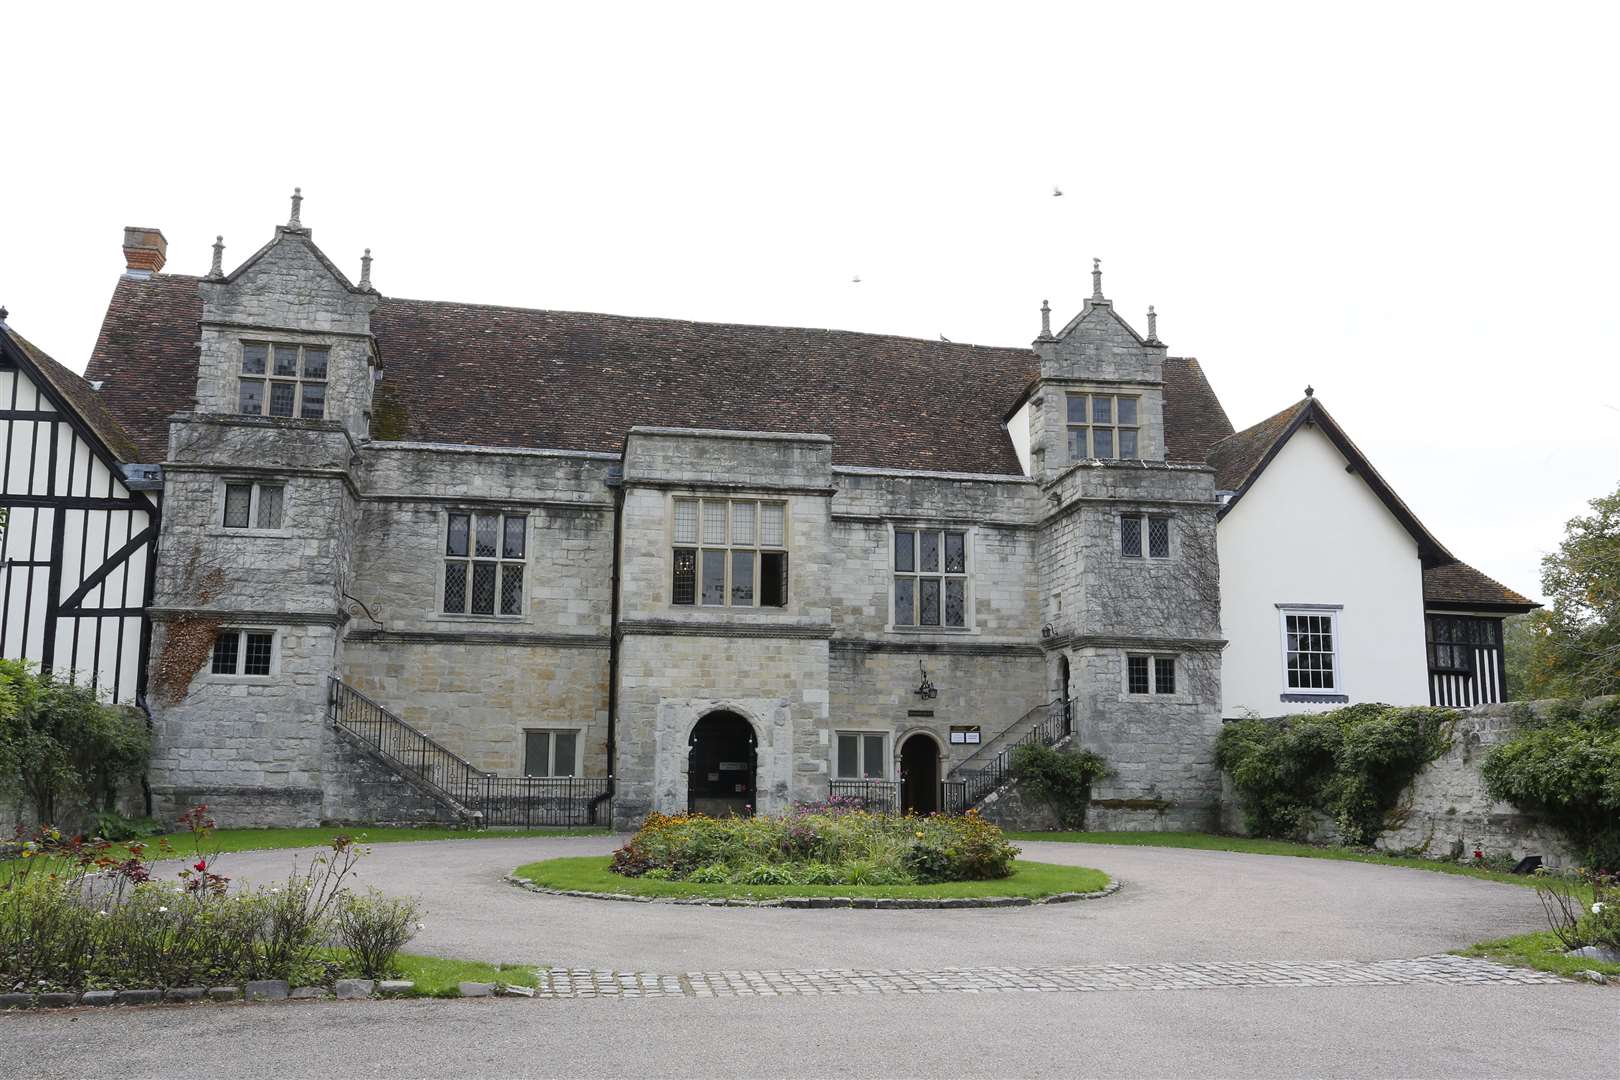 Inquests in the county are held at Maidstone's Archbishop's Palace, among other venues